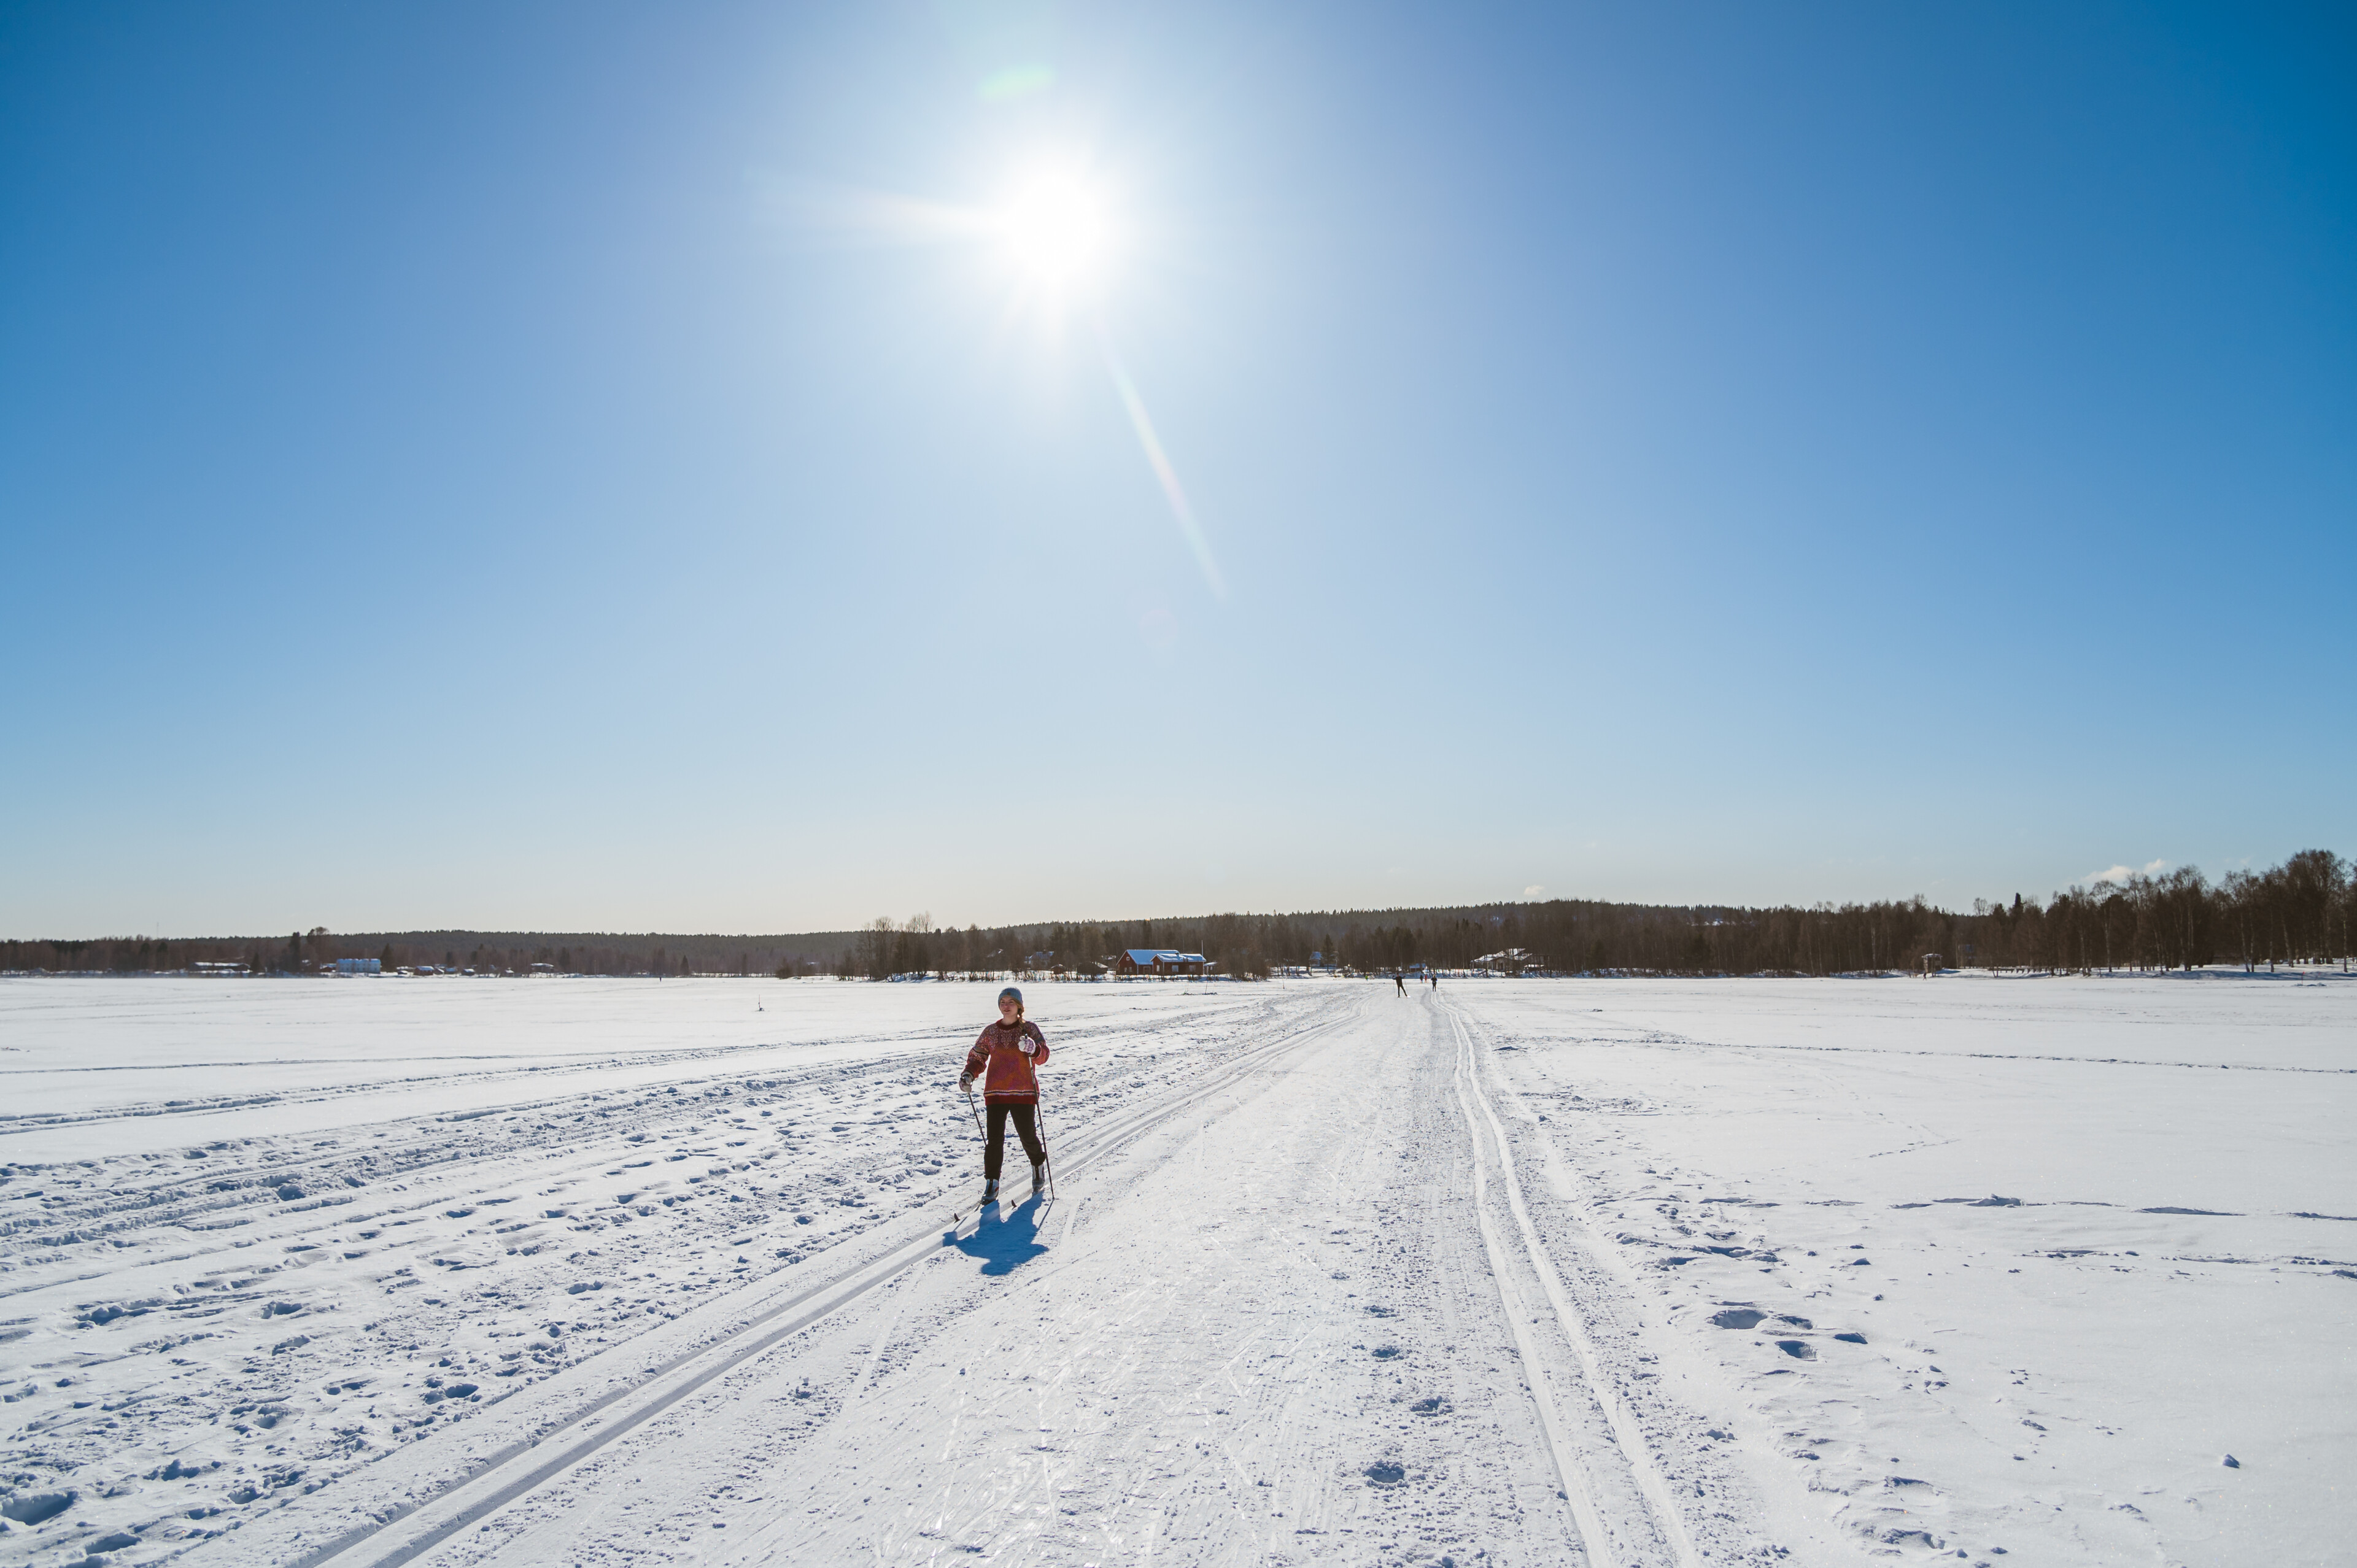 A woman skiing on ice during a sunny winter day in Rovaniemi, Lapland, Finland.